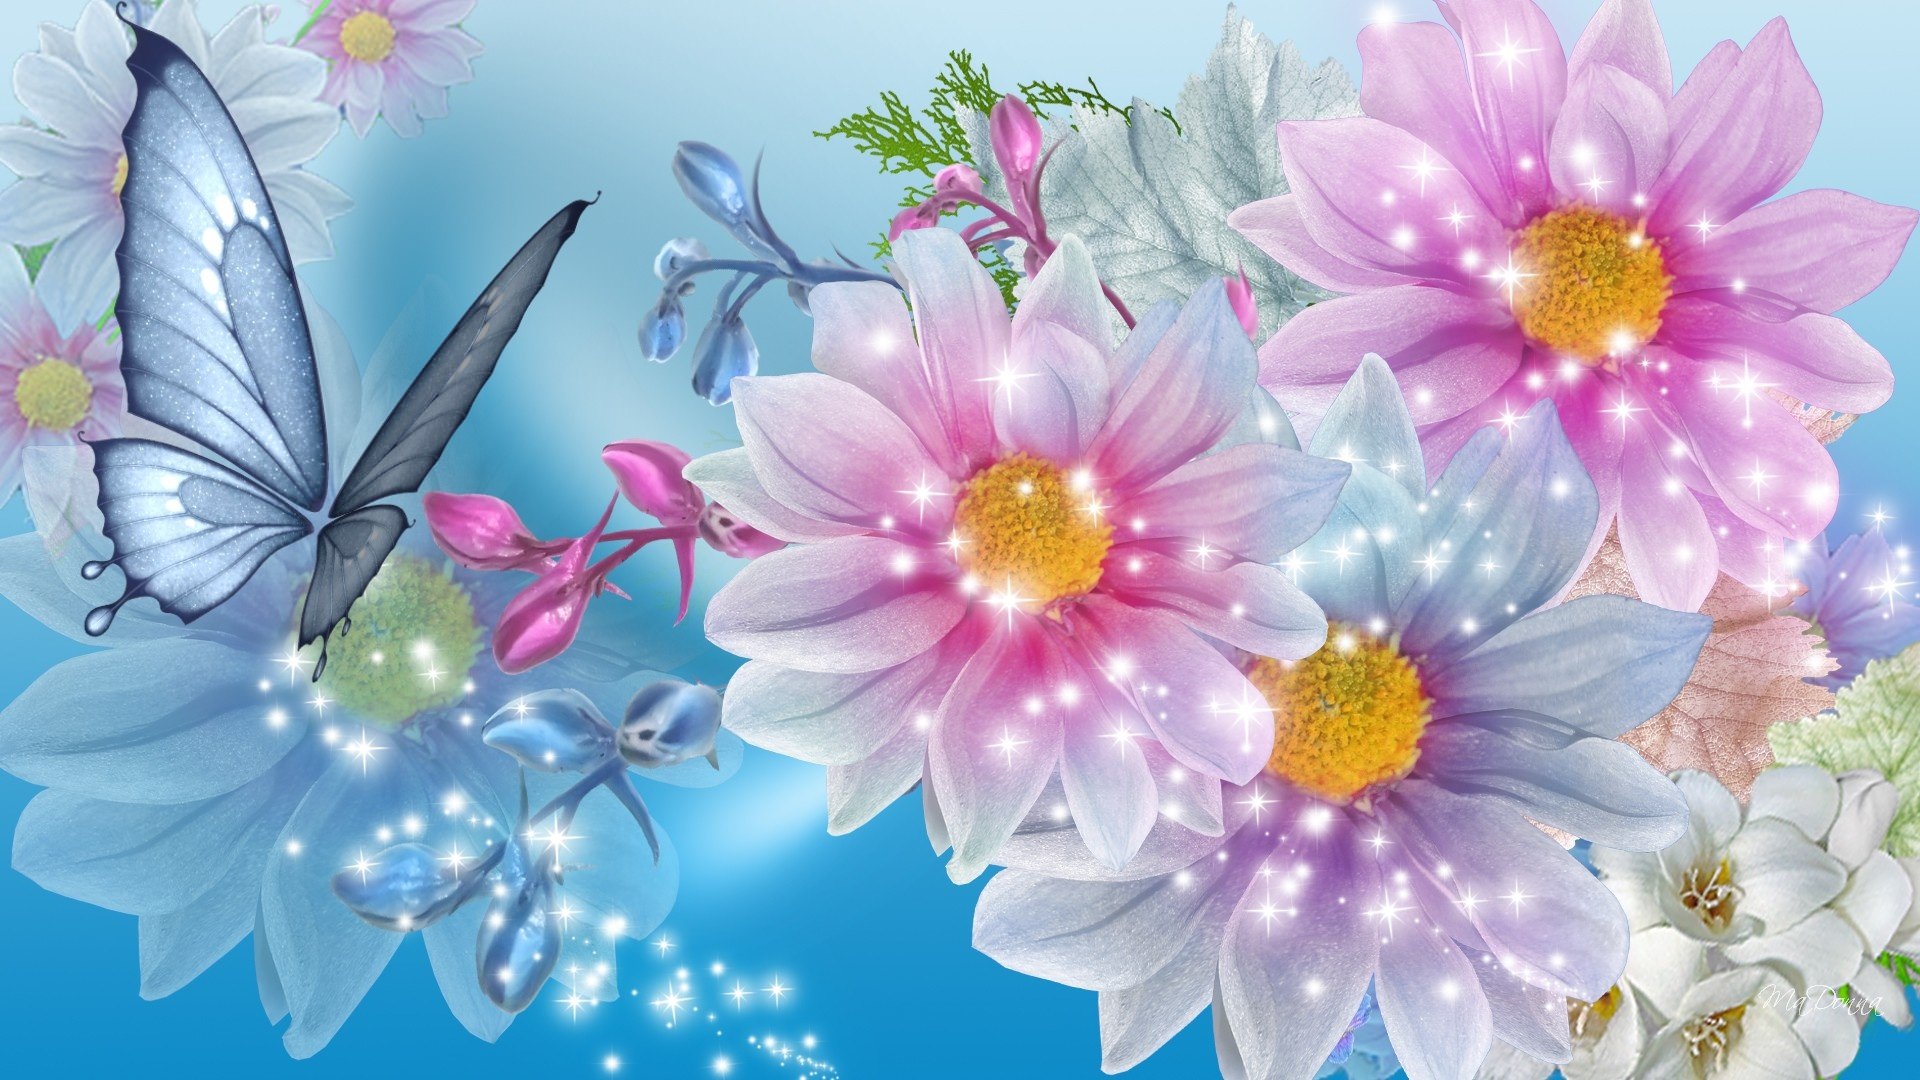 169+ Flower Backgrounds, Wallpapers, Pictures, Images ...